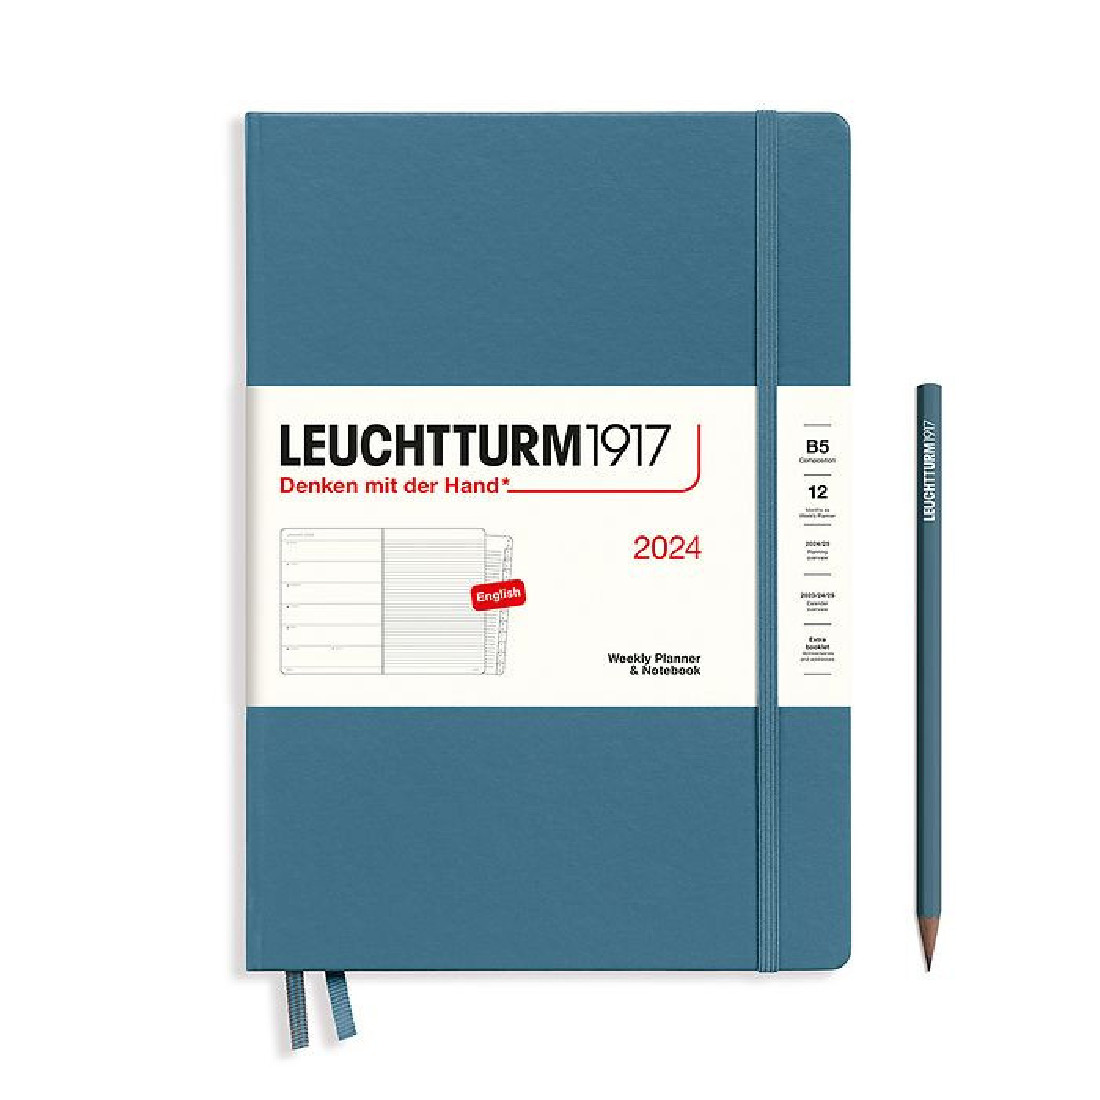 Leuchtturm 1917 Weekly Planner and Notebook 2024 Stone Blue B5 Hard Cover